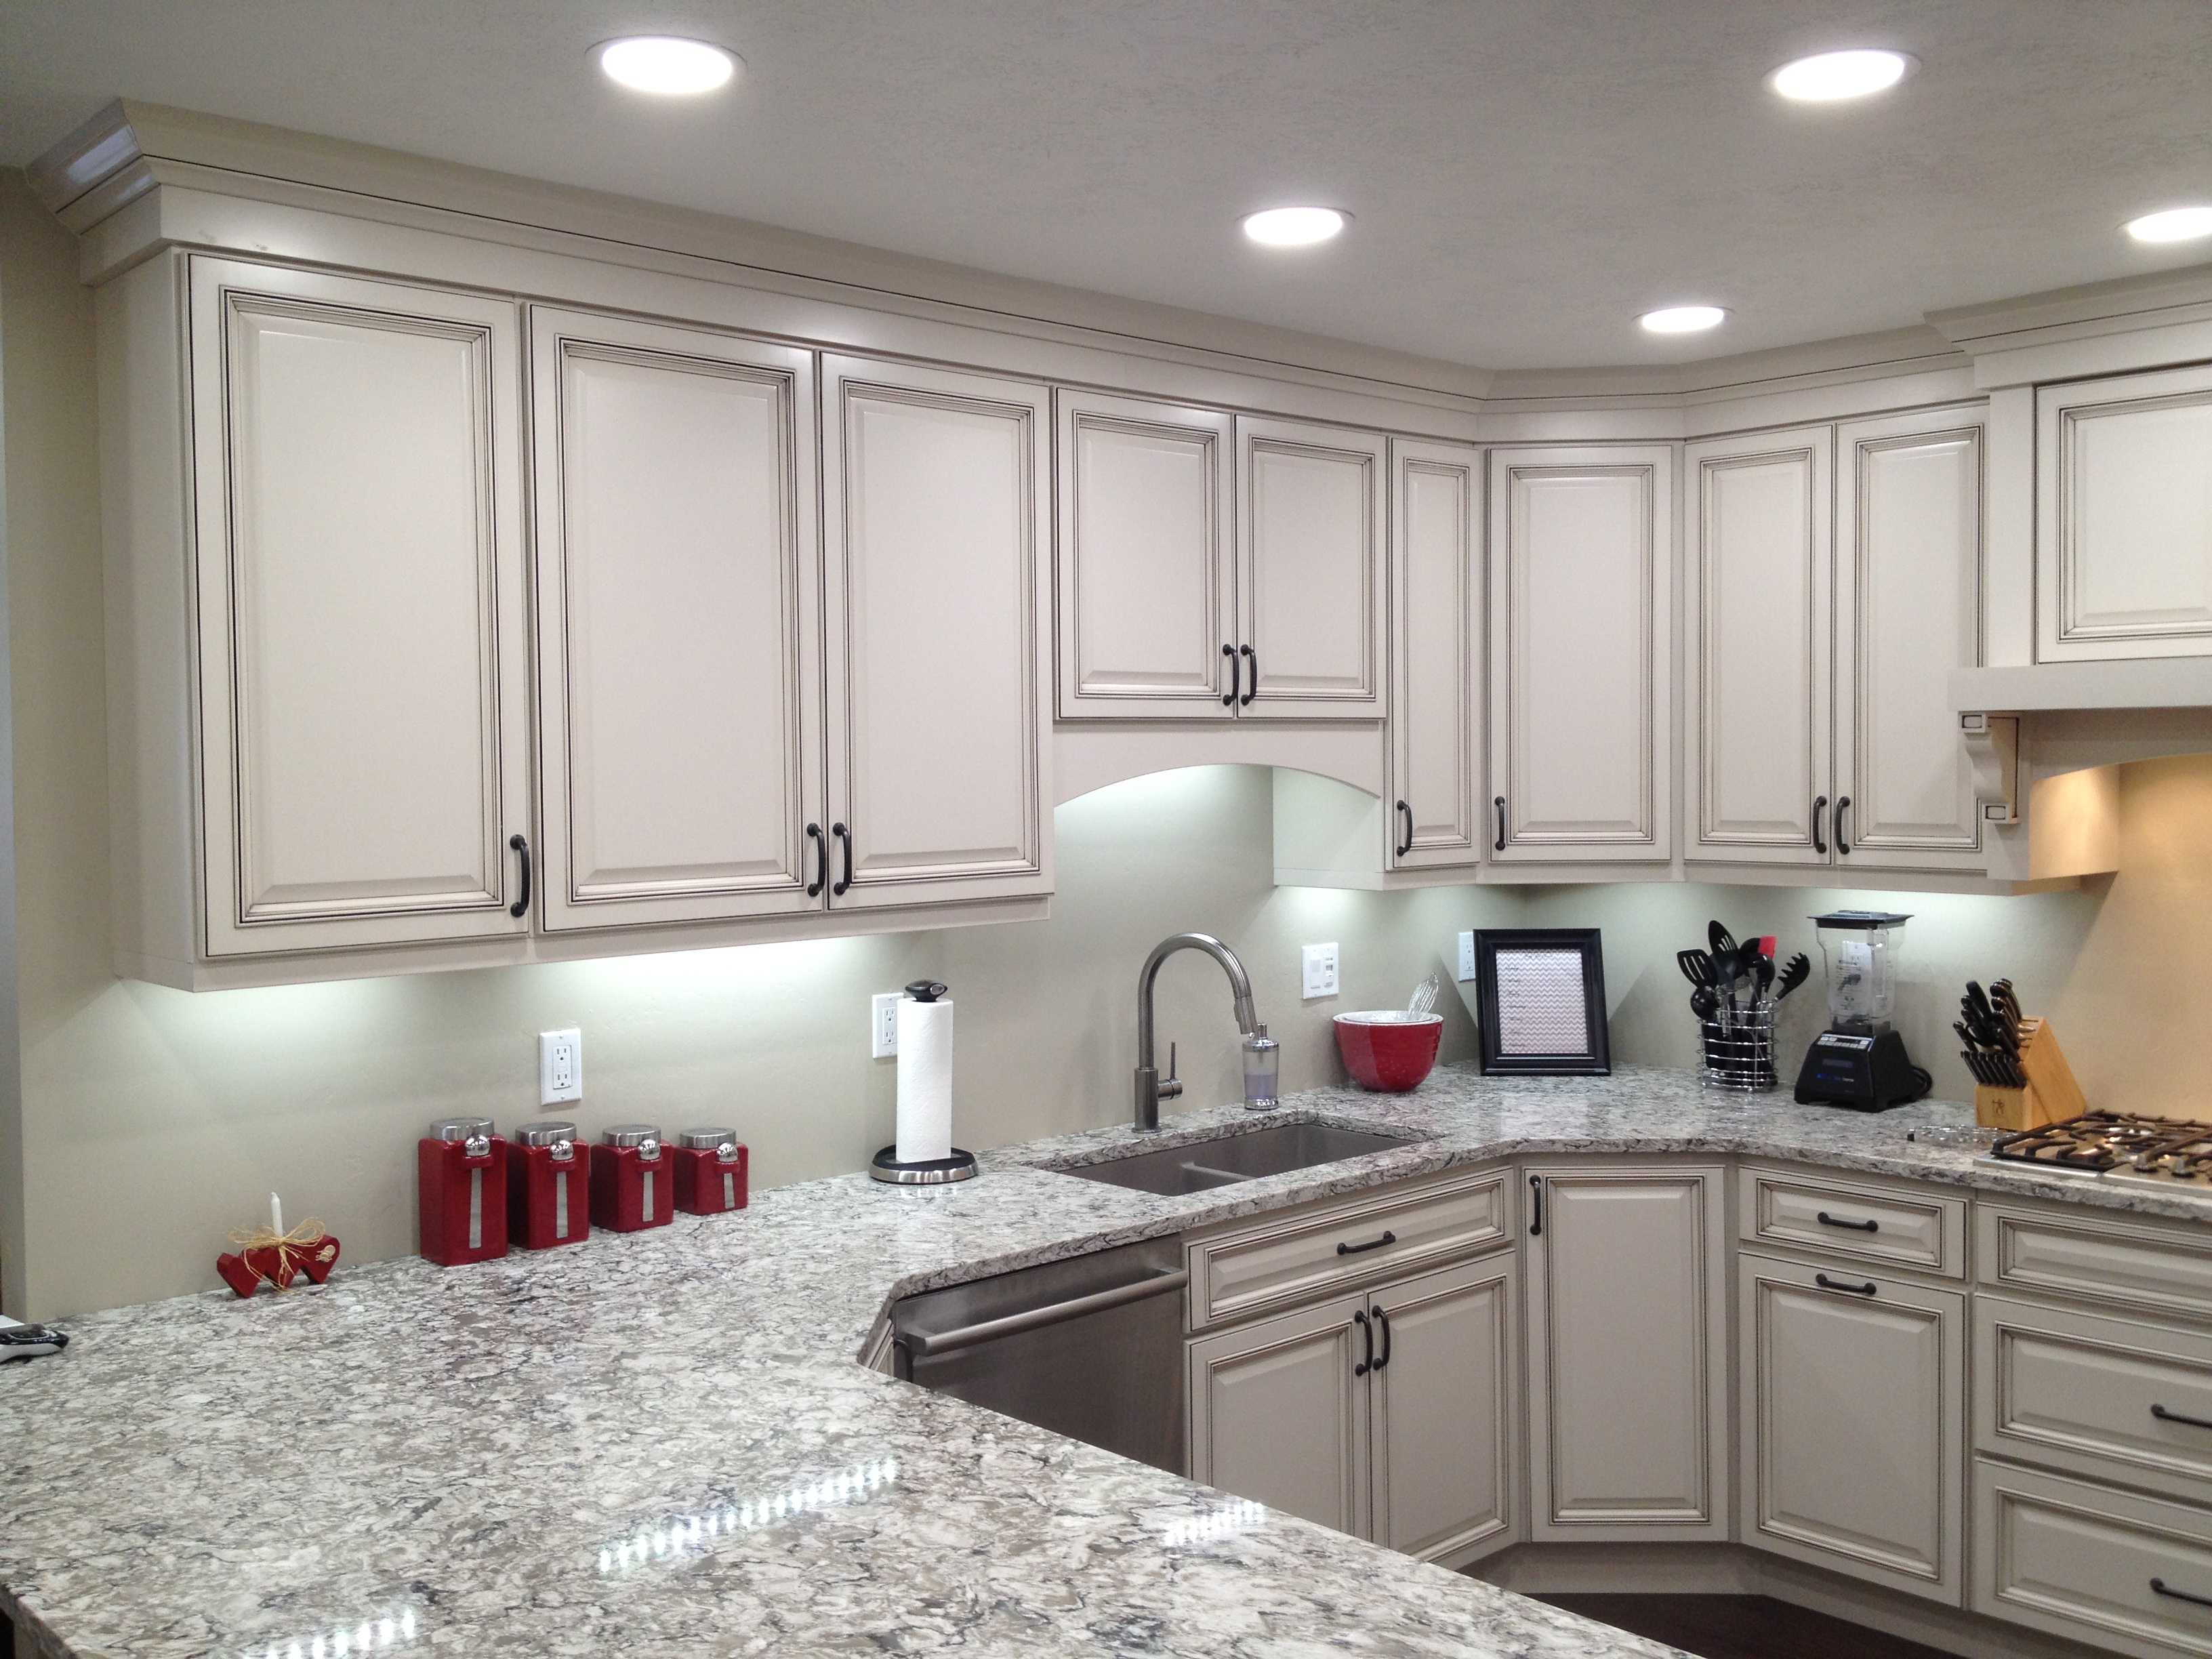 Wireless Led Under Cabinet Lighting, Under Kitchen Cabinet Lighting Without Wiring